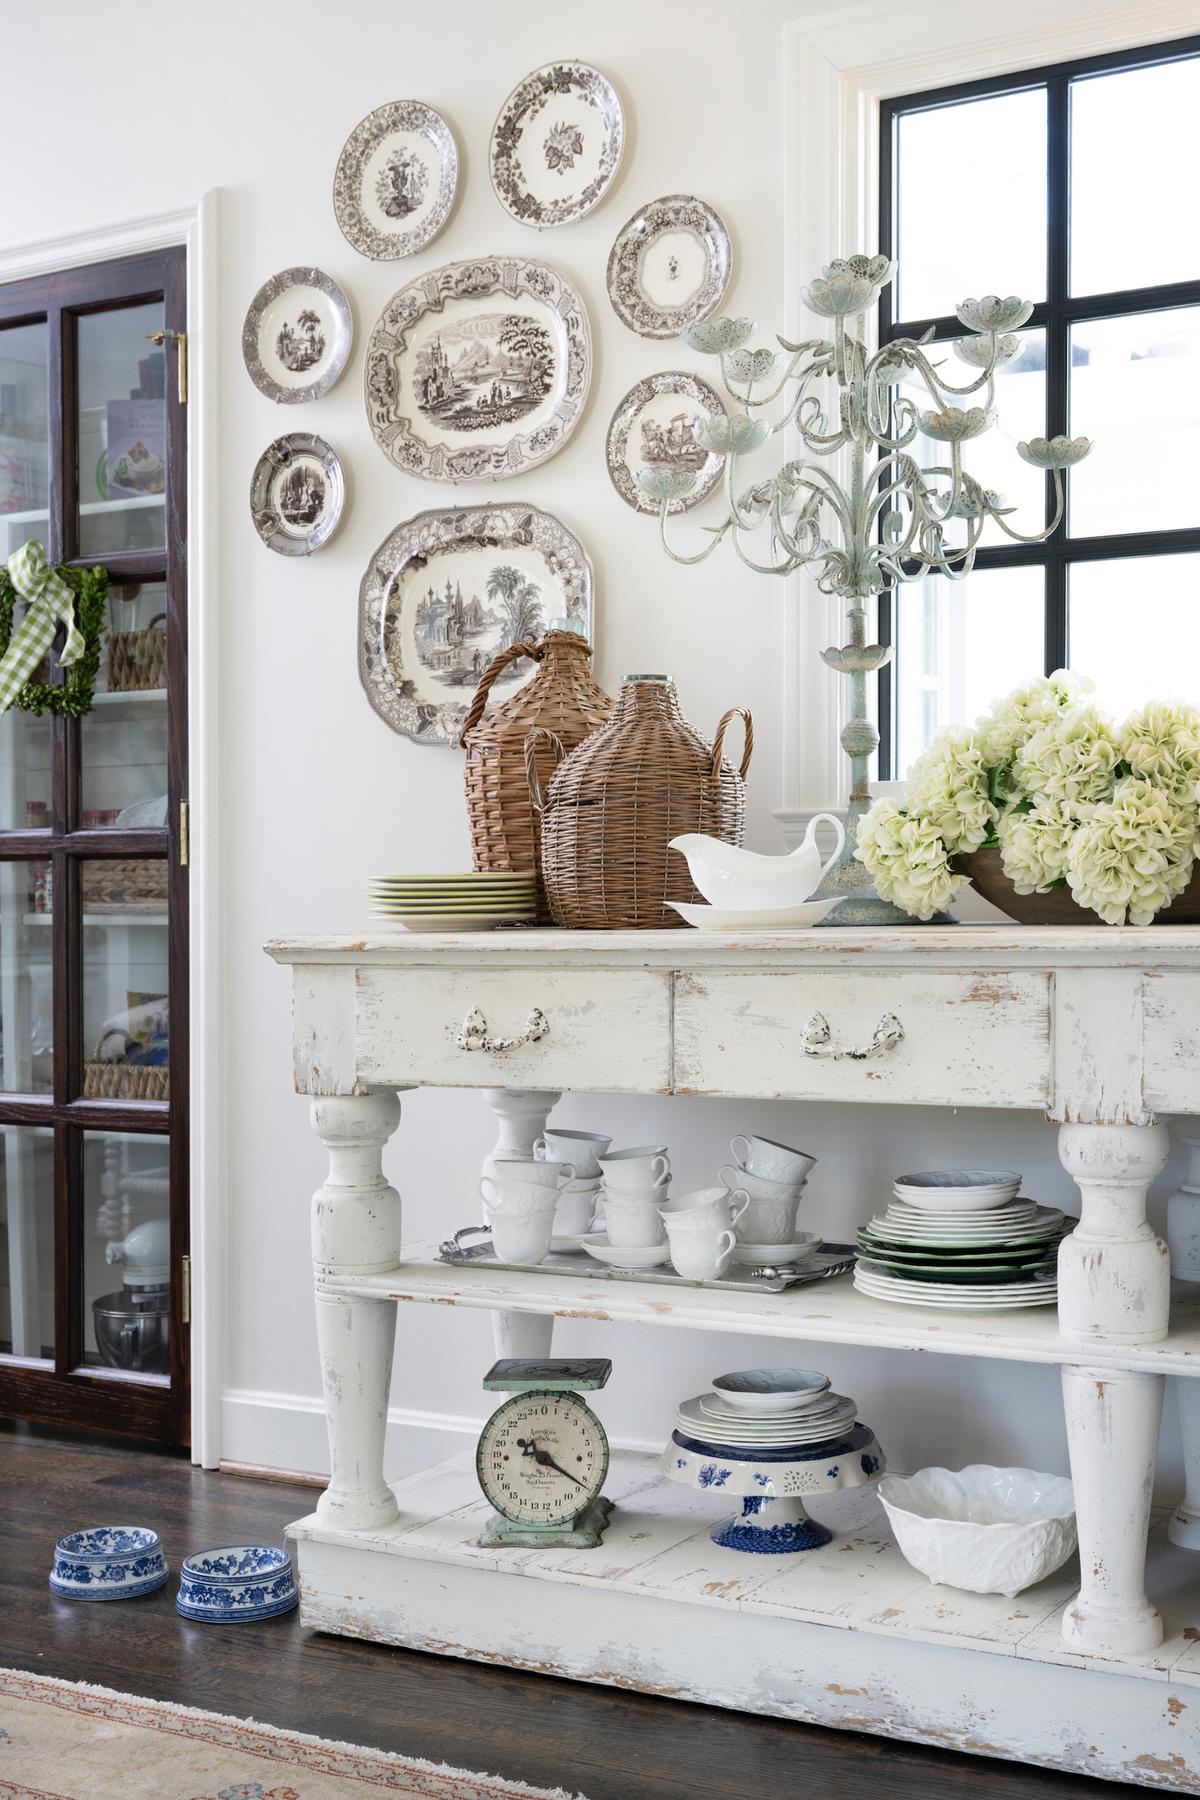 To the right of the pantry is a rustic vintage-inspired buffet layered with everyday pieces and stacks of dainty dishes. (Handout/TNS)